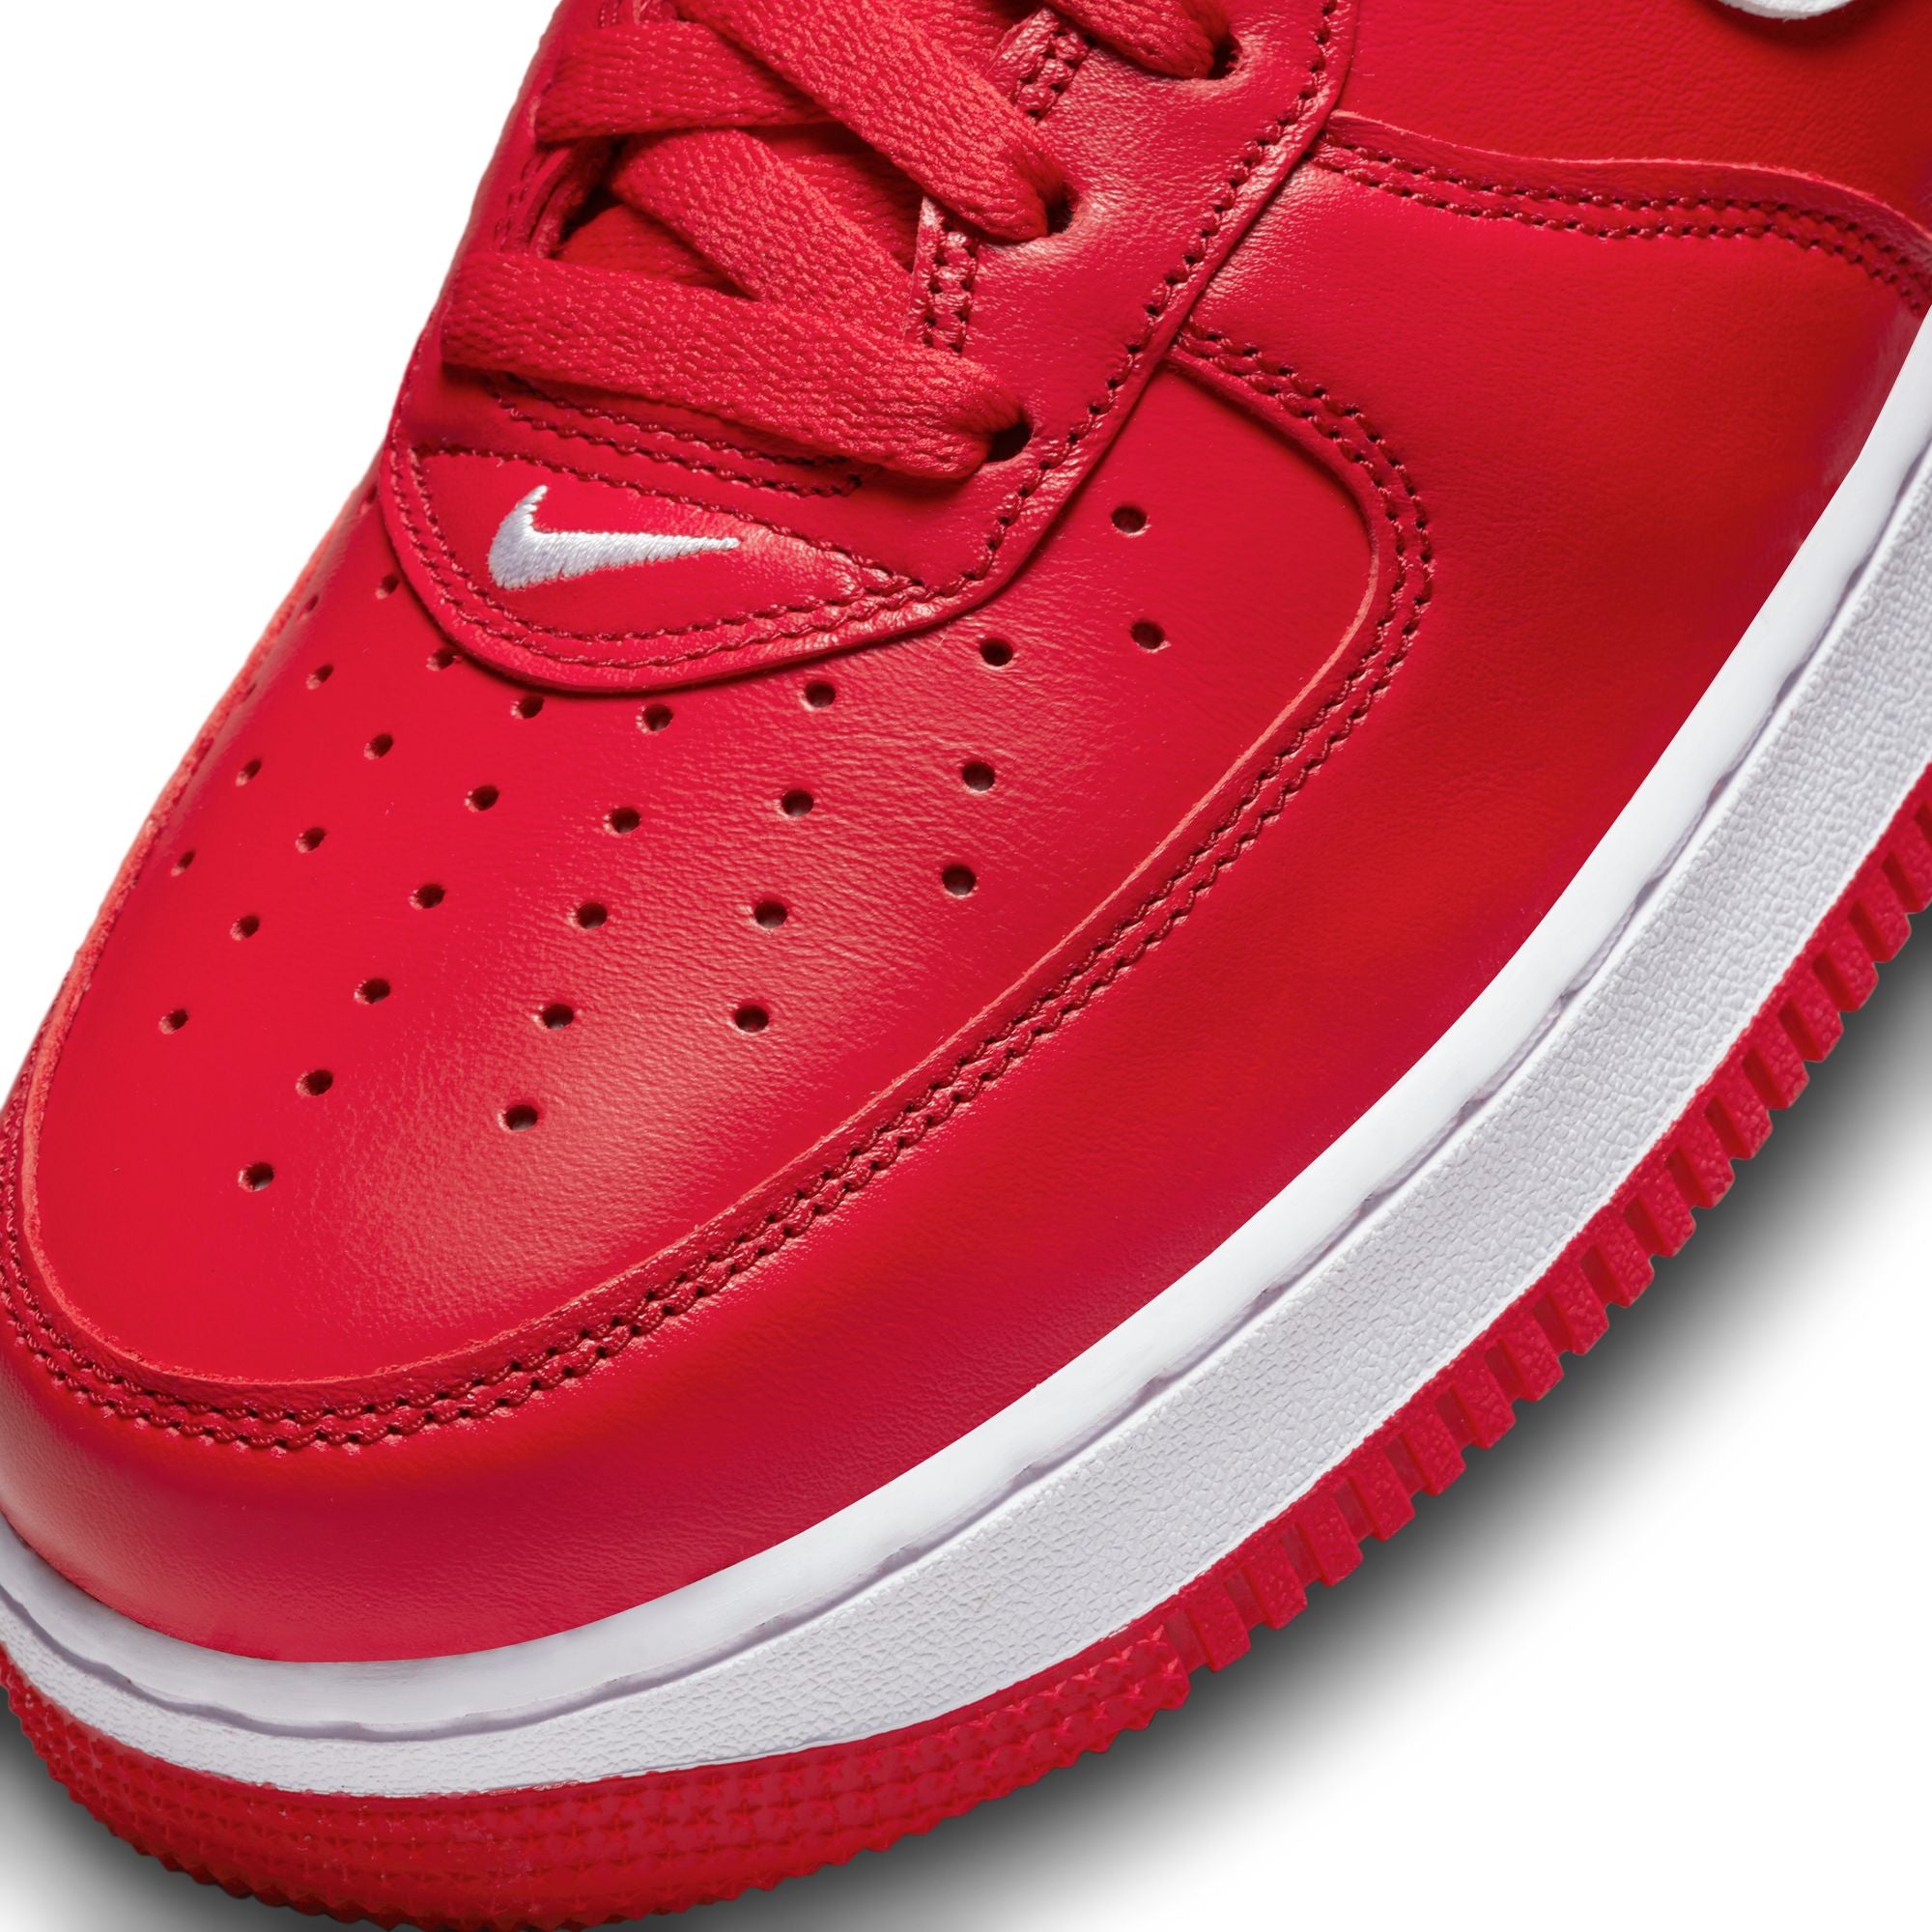 Air Force 1 Retro Low - &#39;University Red&#39; - University Red/White